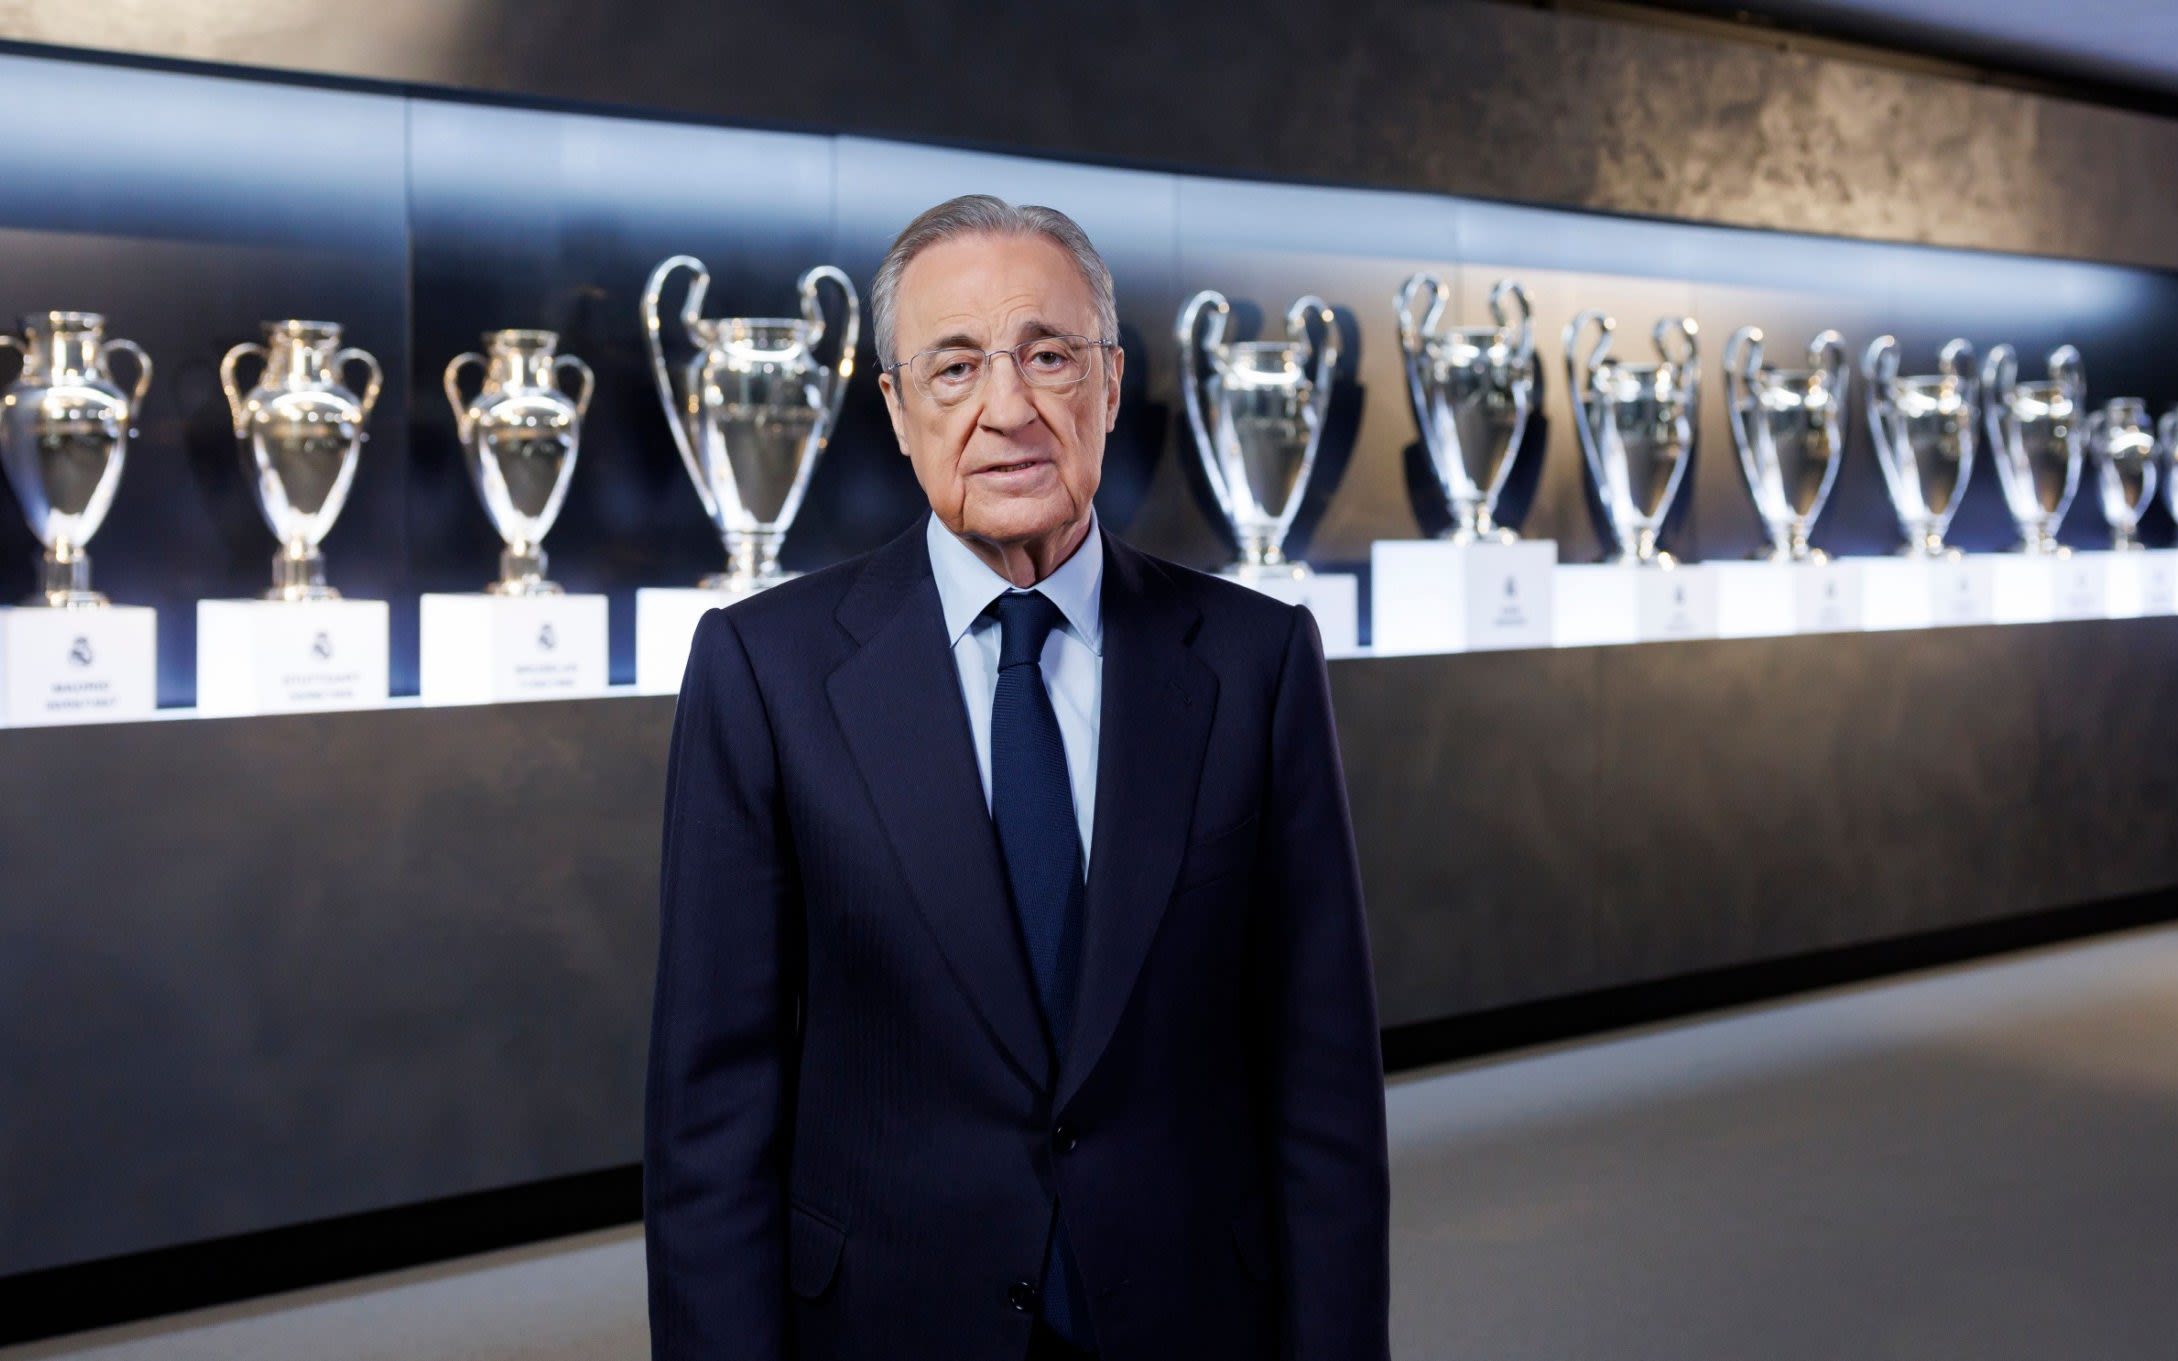 A battle for Real Madrid’s soul – with 122 years of history at stake